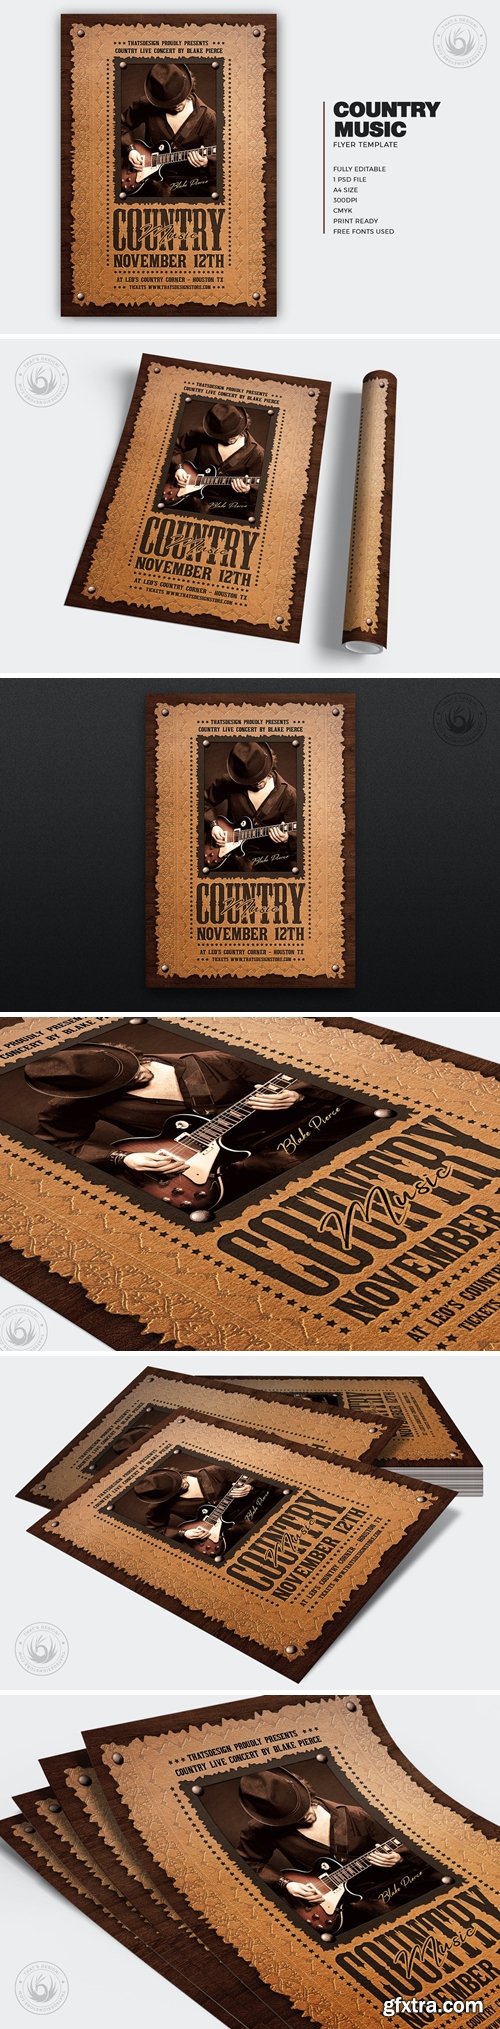 Country Music Flyer Template V7